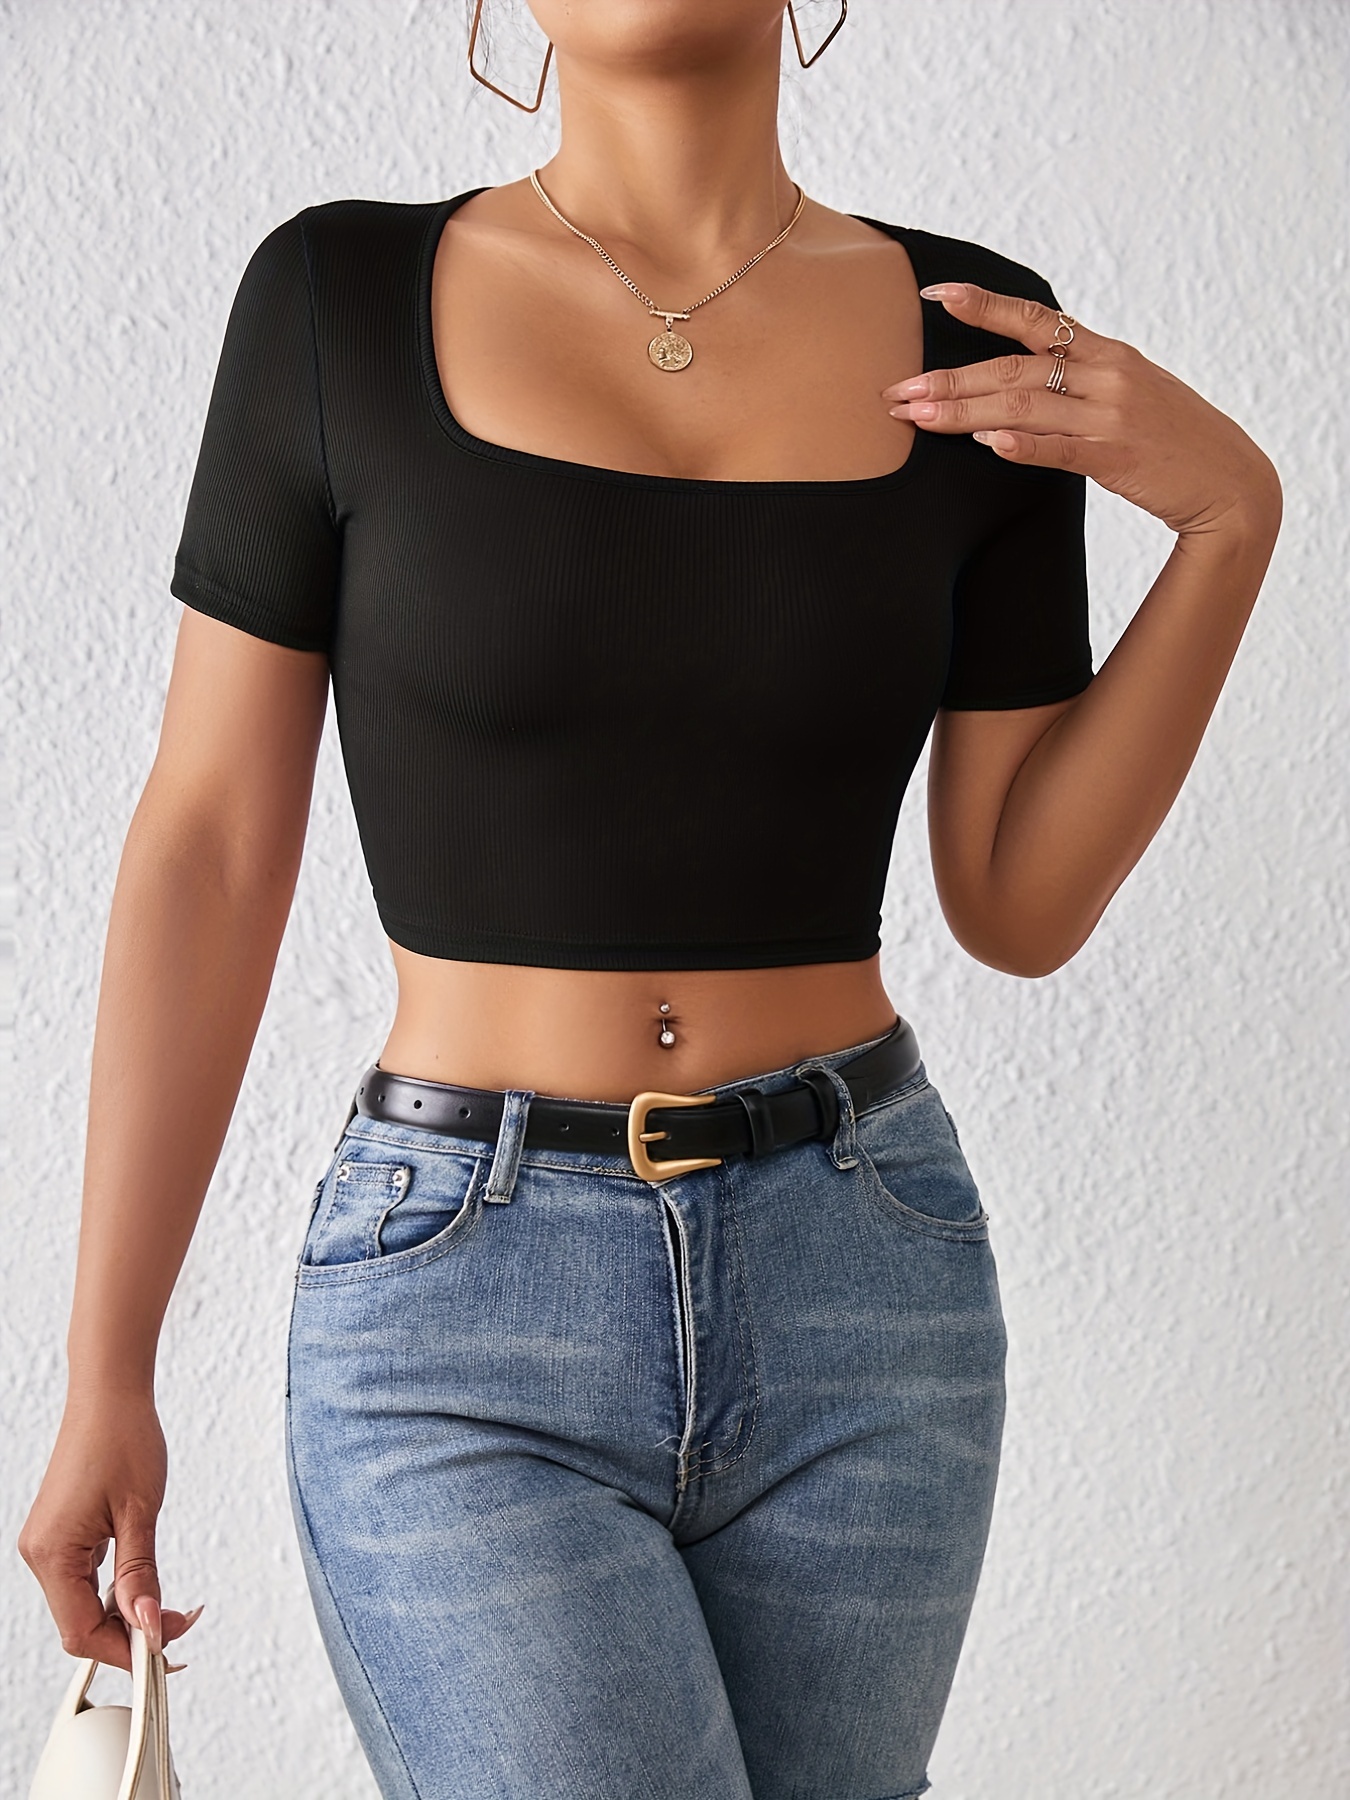 Square Neck Tops for Women Y2k Tops Crop Tops for Women Sexy Y2k Clothes  Square Neck Long Sleeve Top (Black,S,Small) at  Women's Clothing store